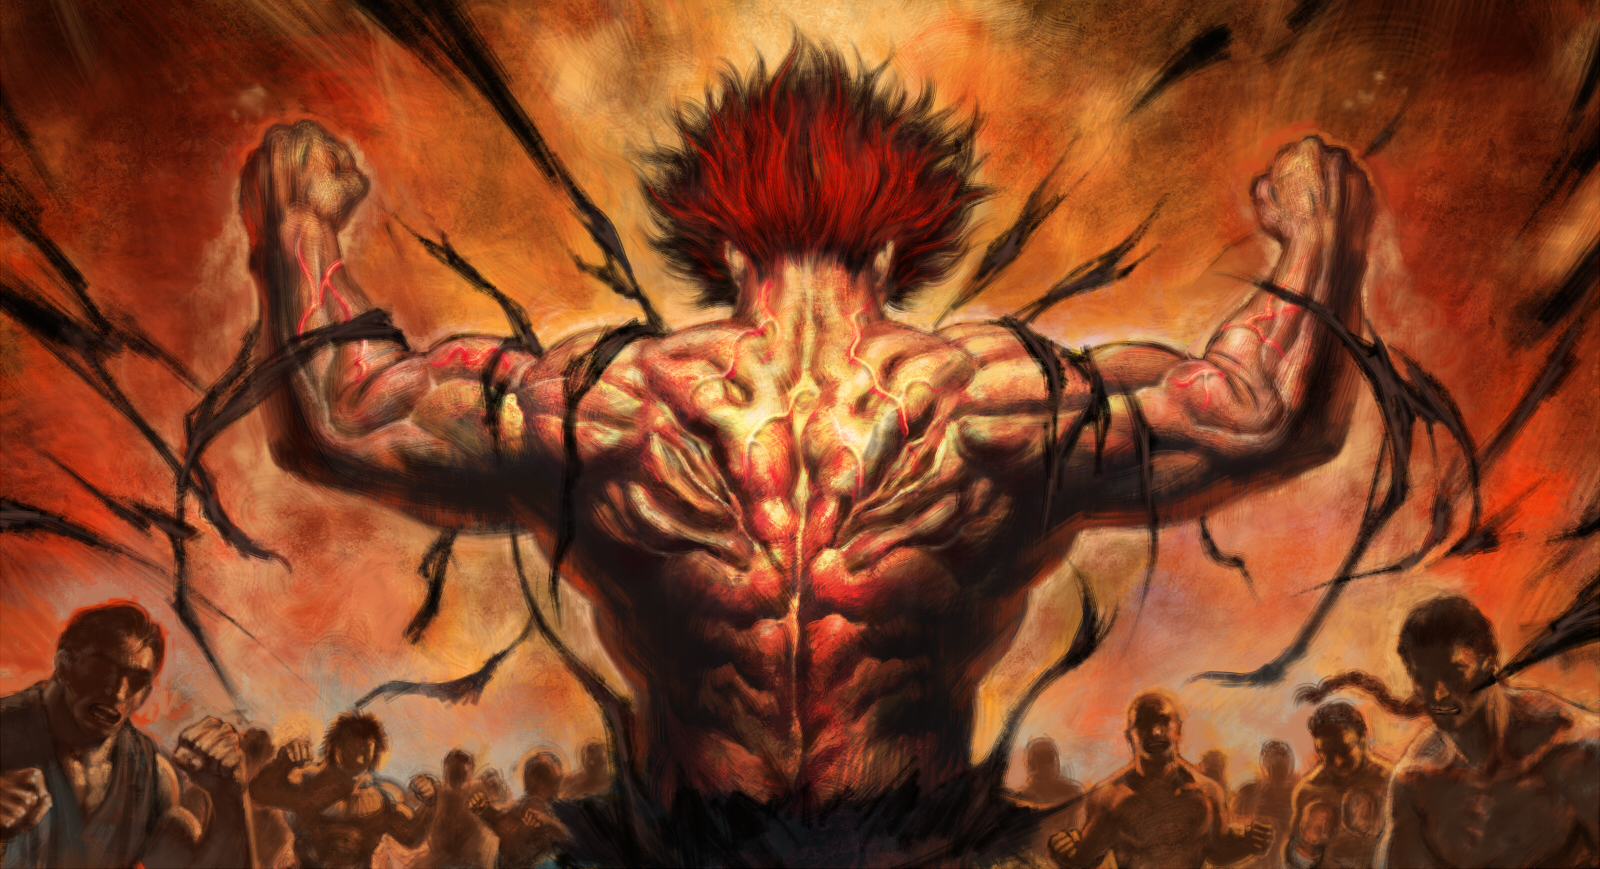 Baki The Grappler's Latest Manga to End This Summer